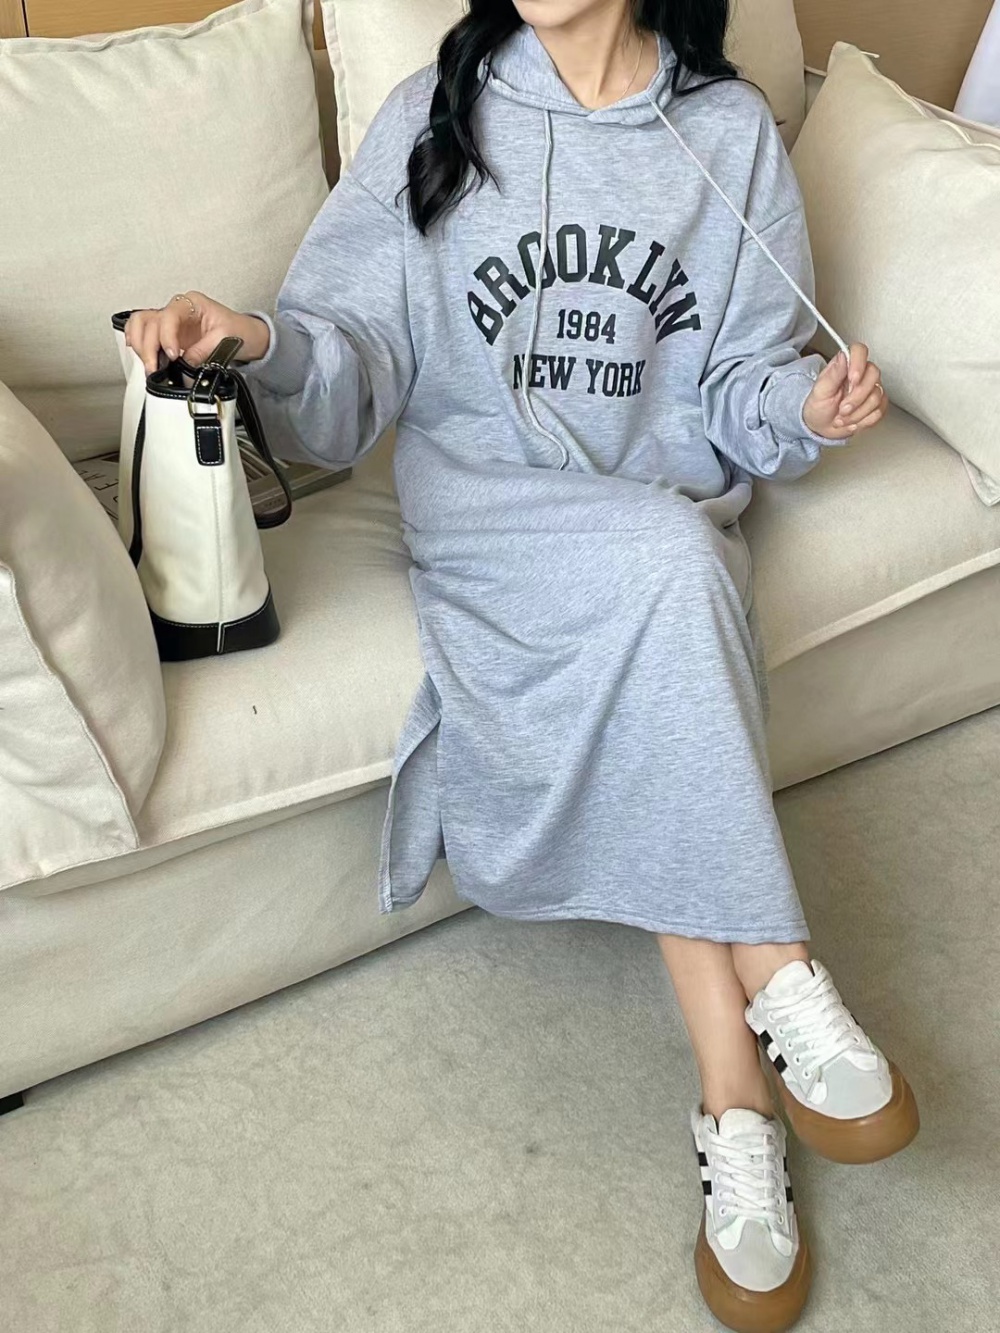 Korean style Casual hoodie pullover dress for women